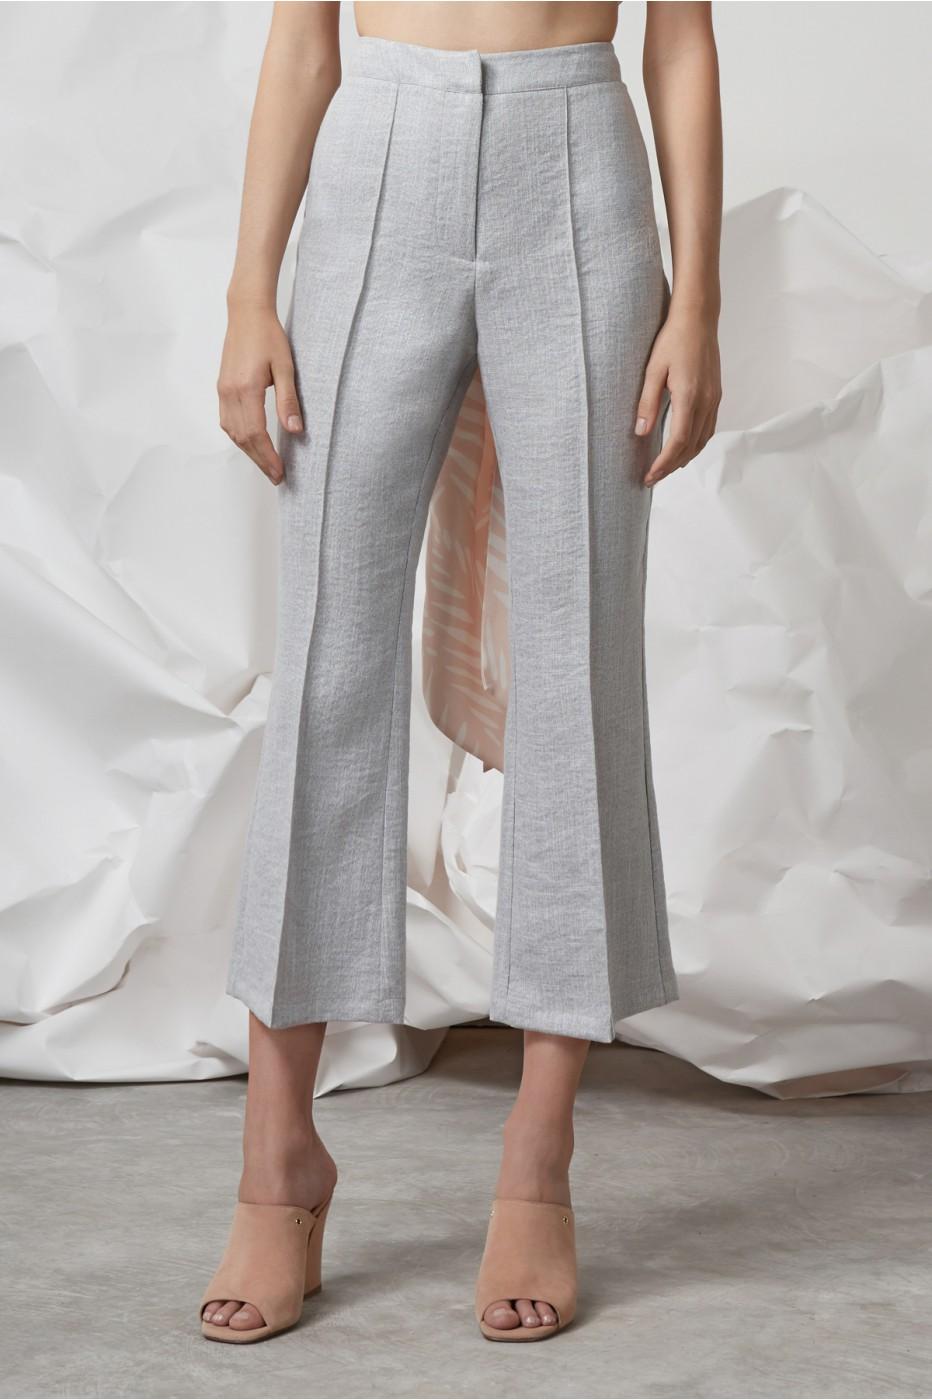 Finders Keepers Coco Pant In Grey Marle | ModeSens